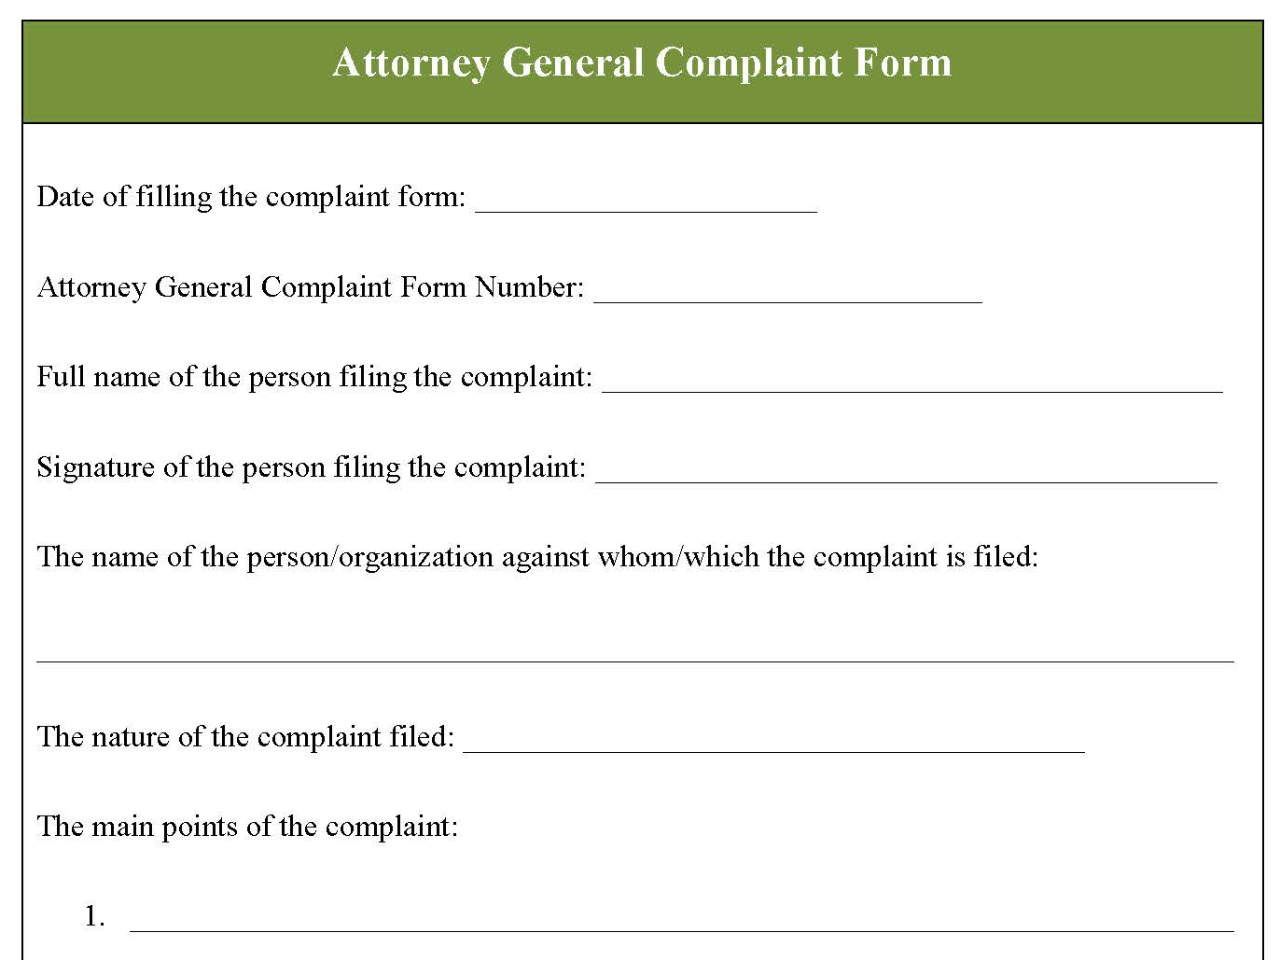 Attorney General Complaint Form